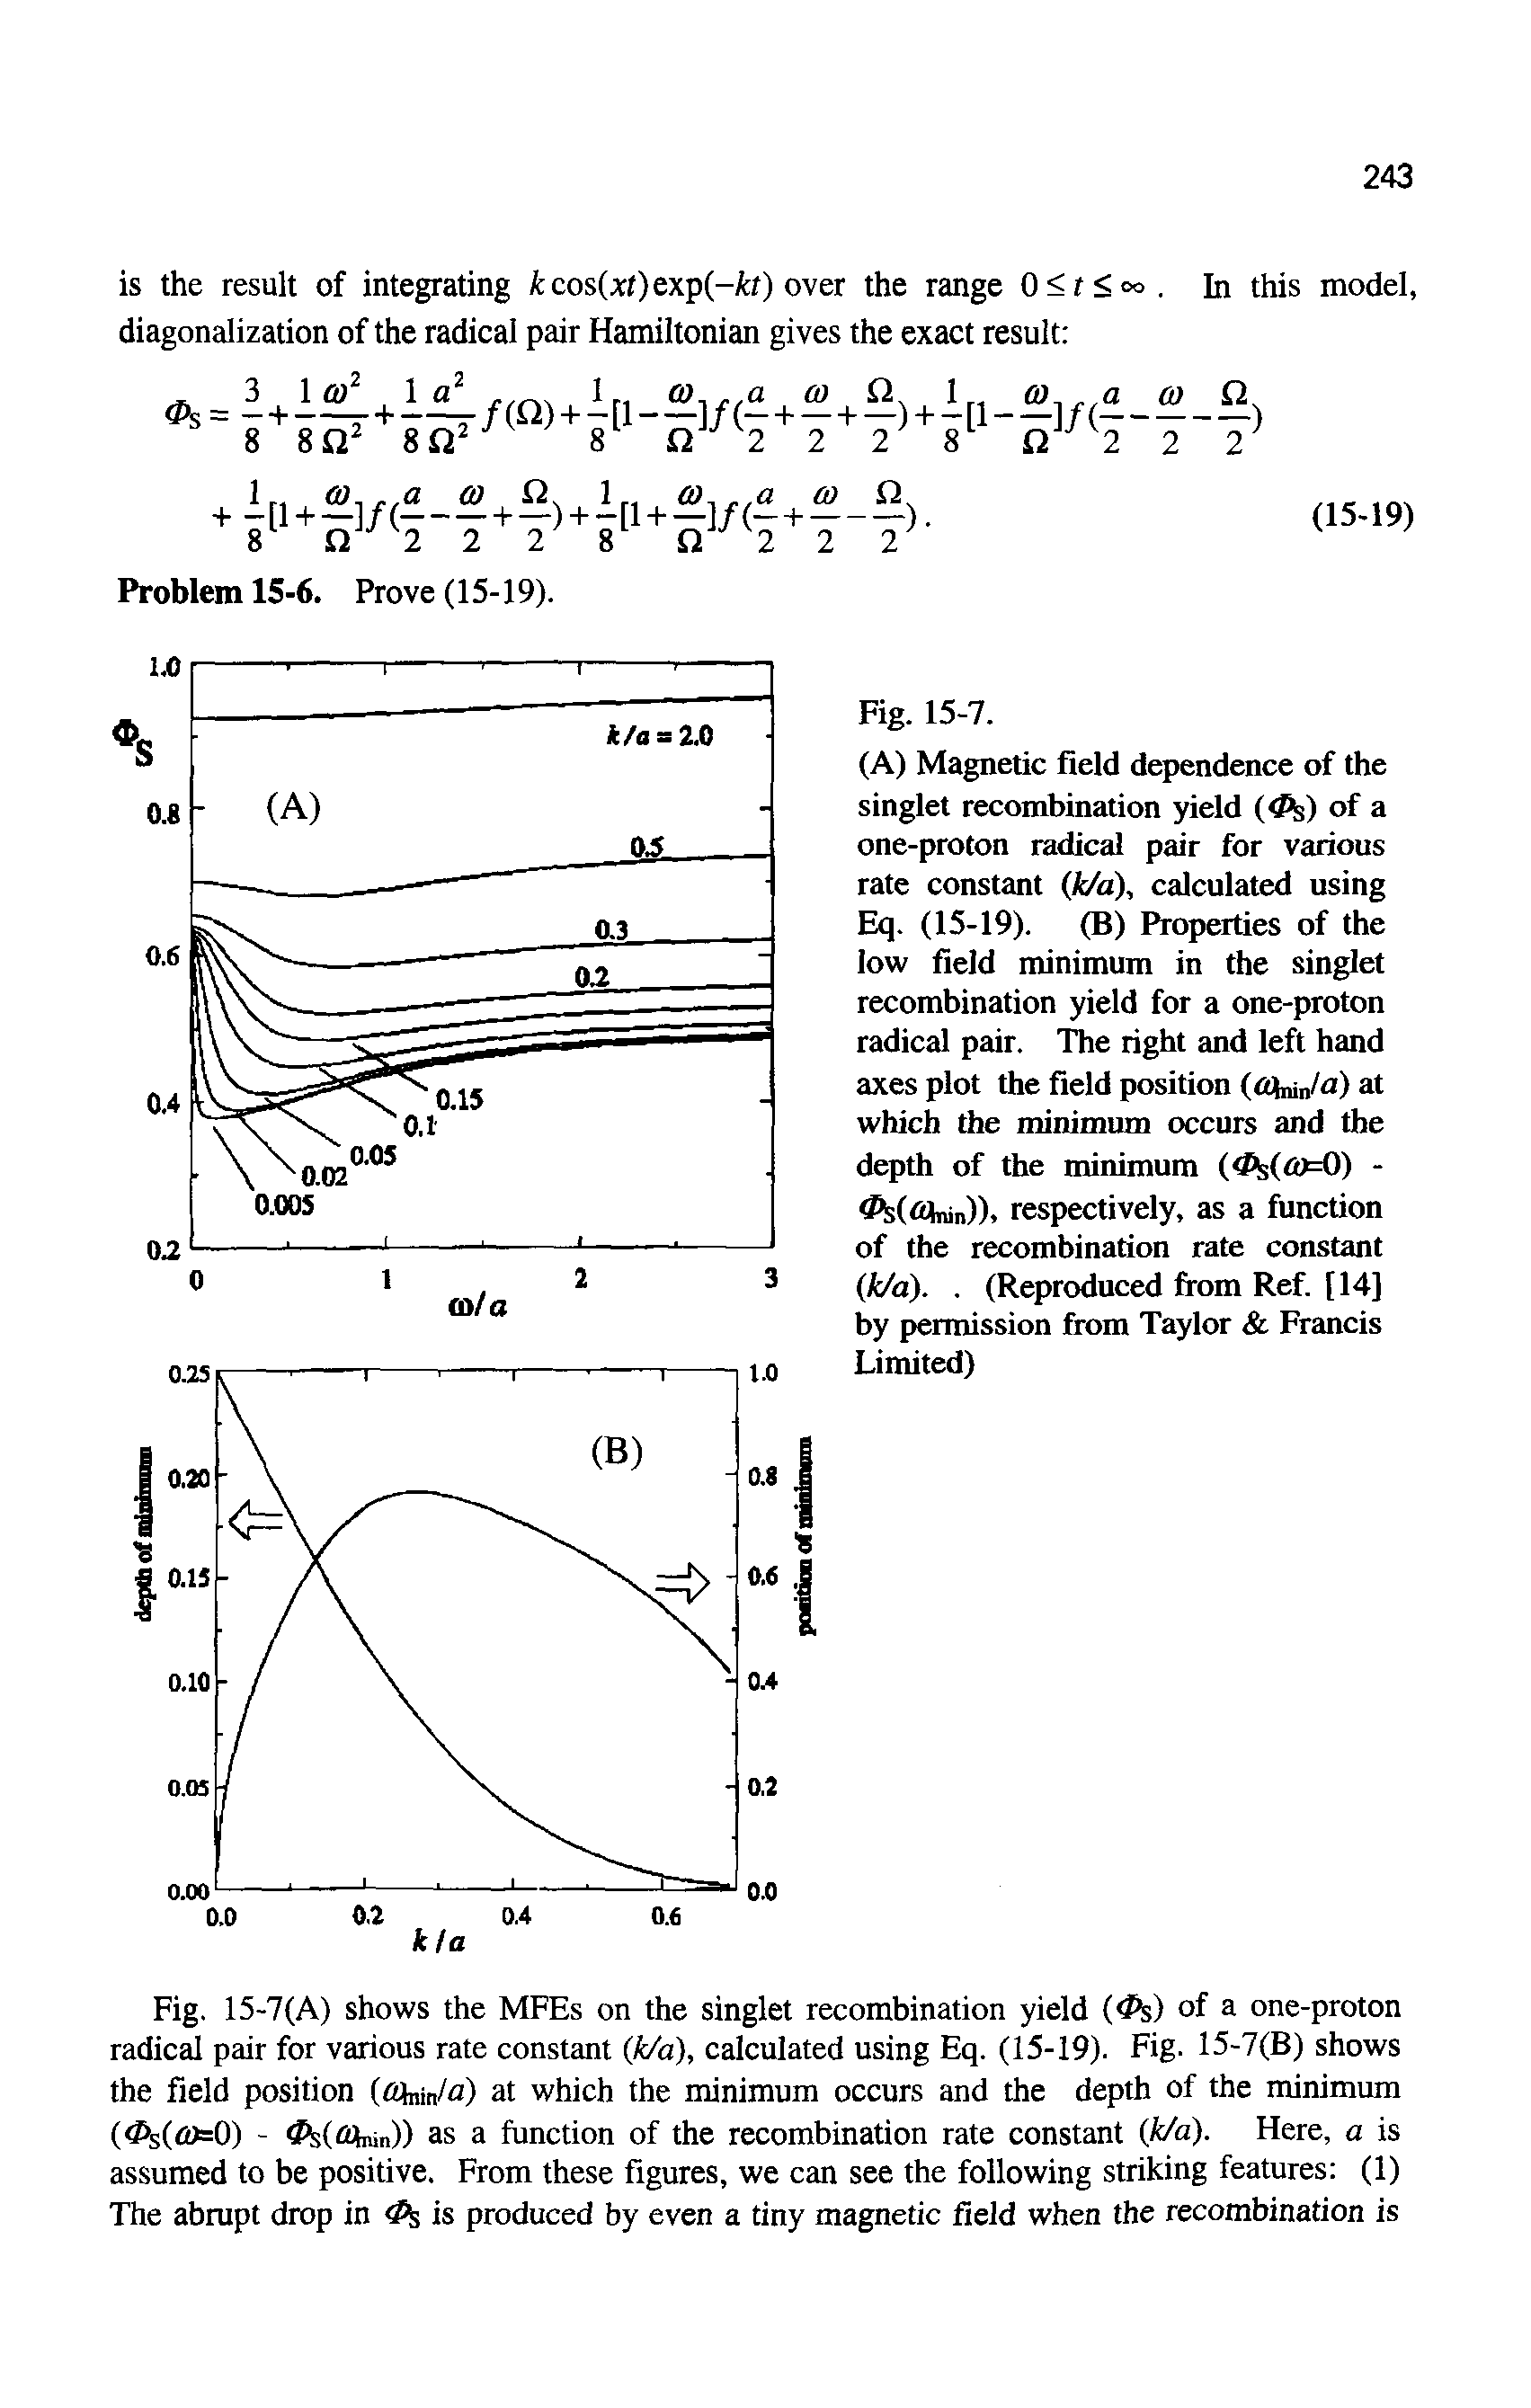 Fig. 15-7(A) shows the MFEs on the singlet recombination yield (<Ps) of a one-proton radical pair for various rate constant (A/a), calculated using Eq. (15-19). Fig. 15-7(B) shows the field position Ohimla) at which the minimum occurs and the depth of the minimum (d (t2)=0) - (<Sinin)) as a function of the reeombination rate constant (A/a). Here, a is assumed to be positive. From these figures, we can see the following striking features (1) The abrupt drop in 0 is produced by even a tiny magnetic field when the recombination is...